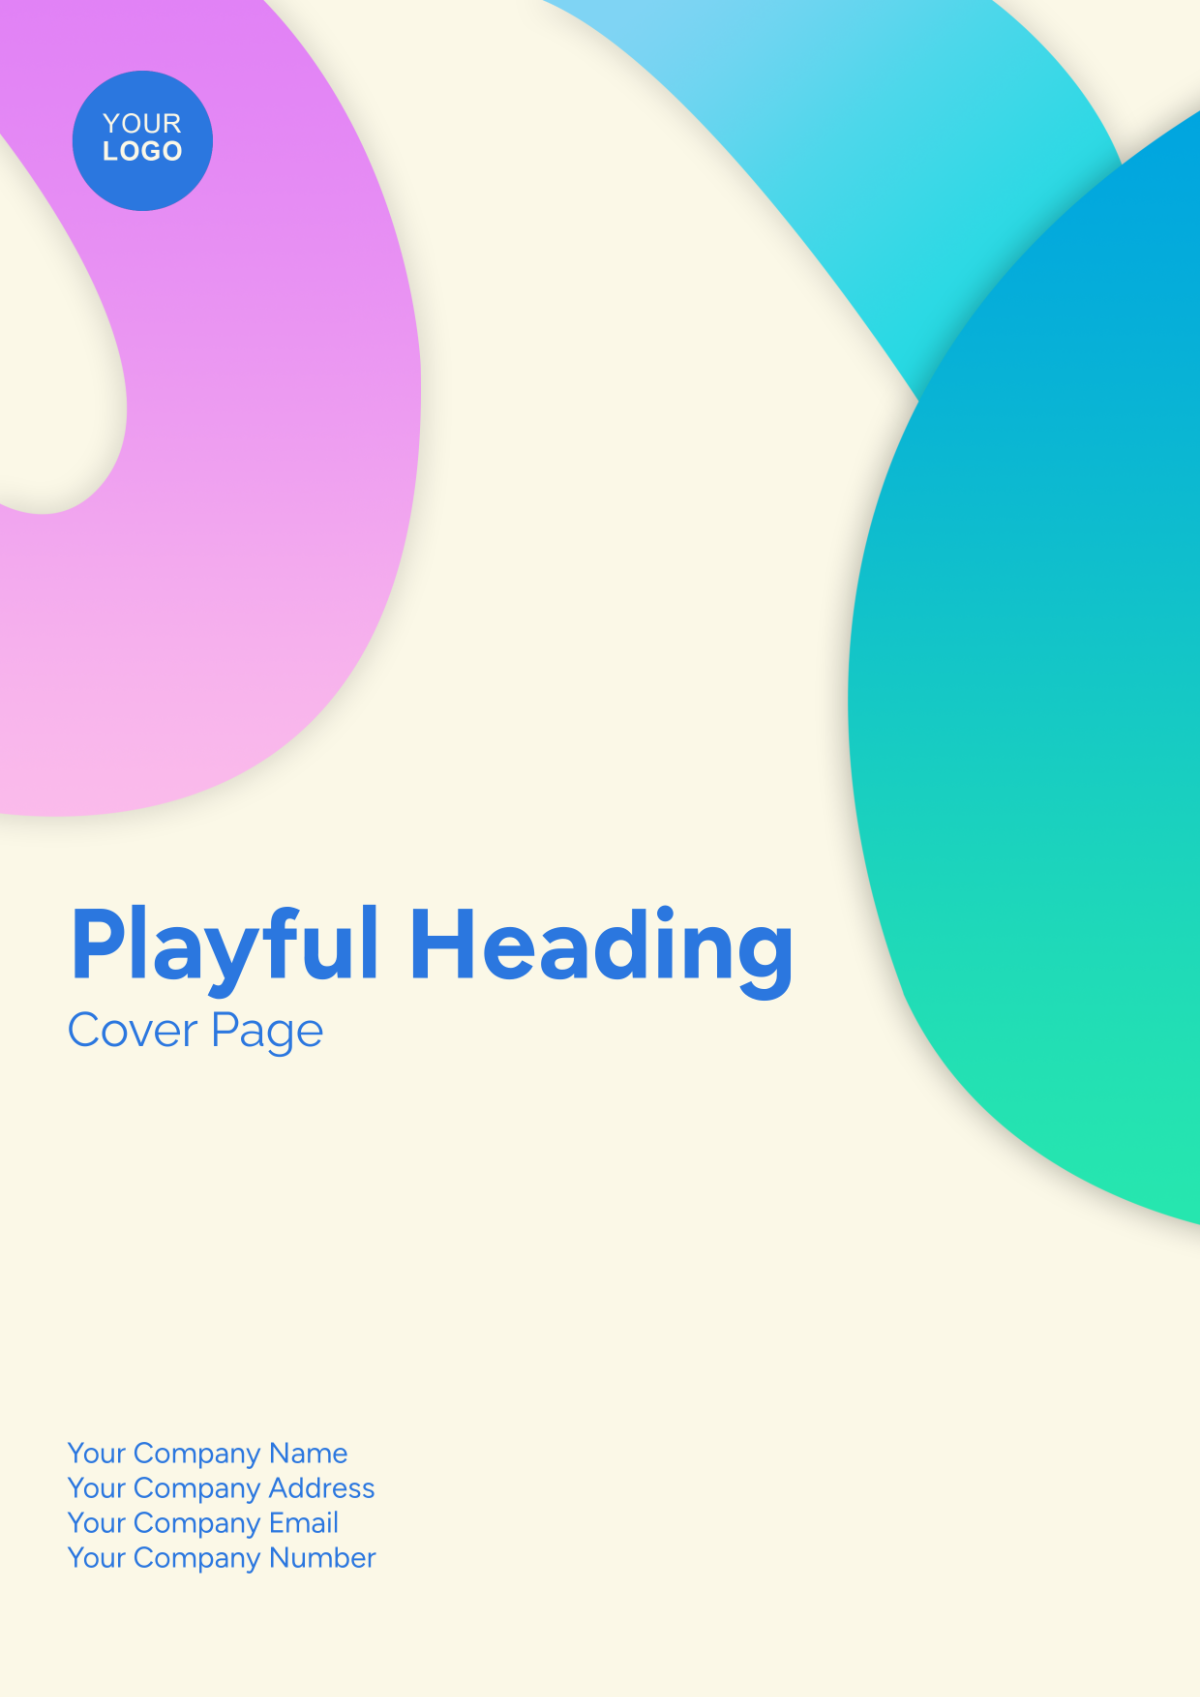 Playful Heading Cover Page